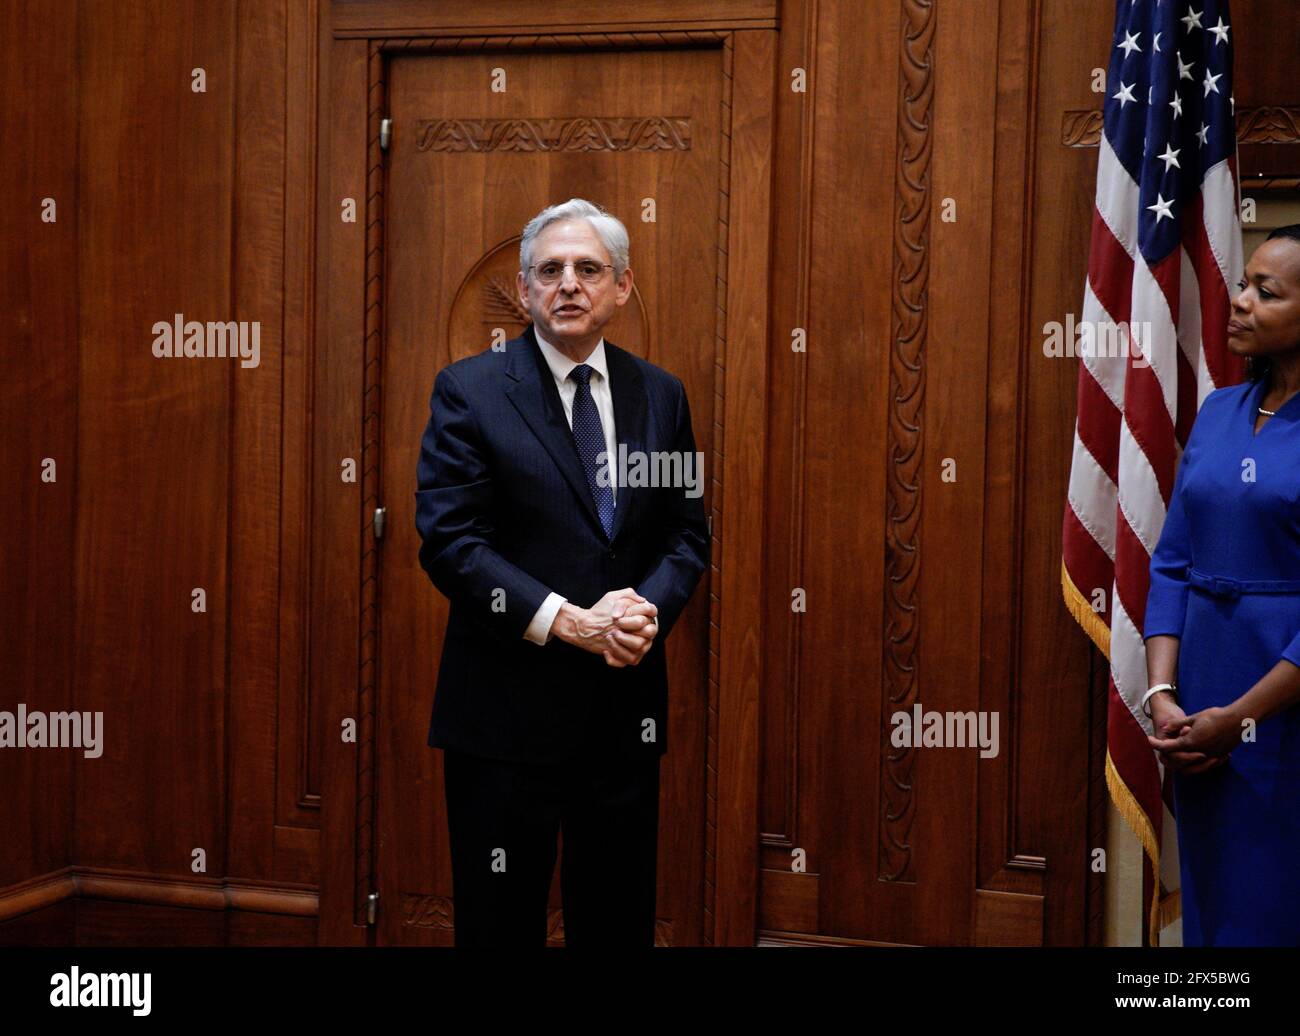 Attorney General Merrick Garland attends as U.S. Vice President Kamala Harris ceremonially swears in Kristen Clarke as Assistant Attorney General for the Civil Rights Division at the Department of Justice in Washington, U.S., May 25, 2021. REUTERS/Yuri Gripas Stock Photo